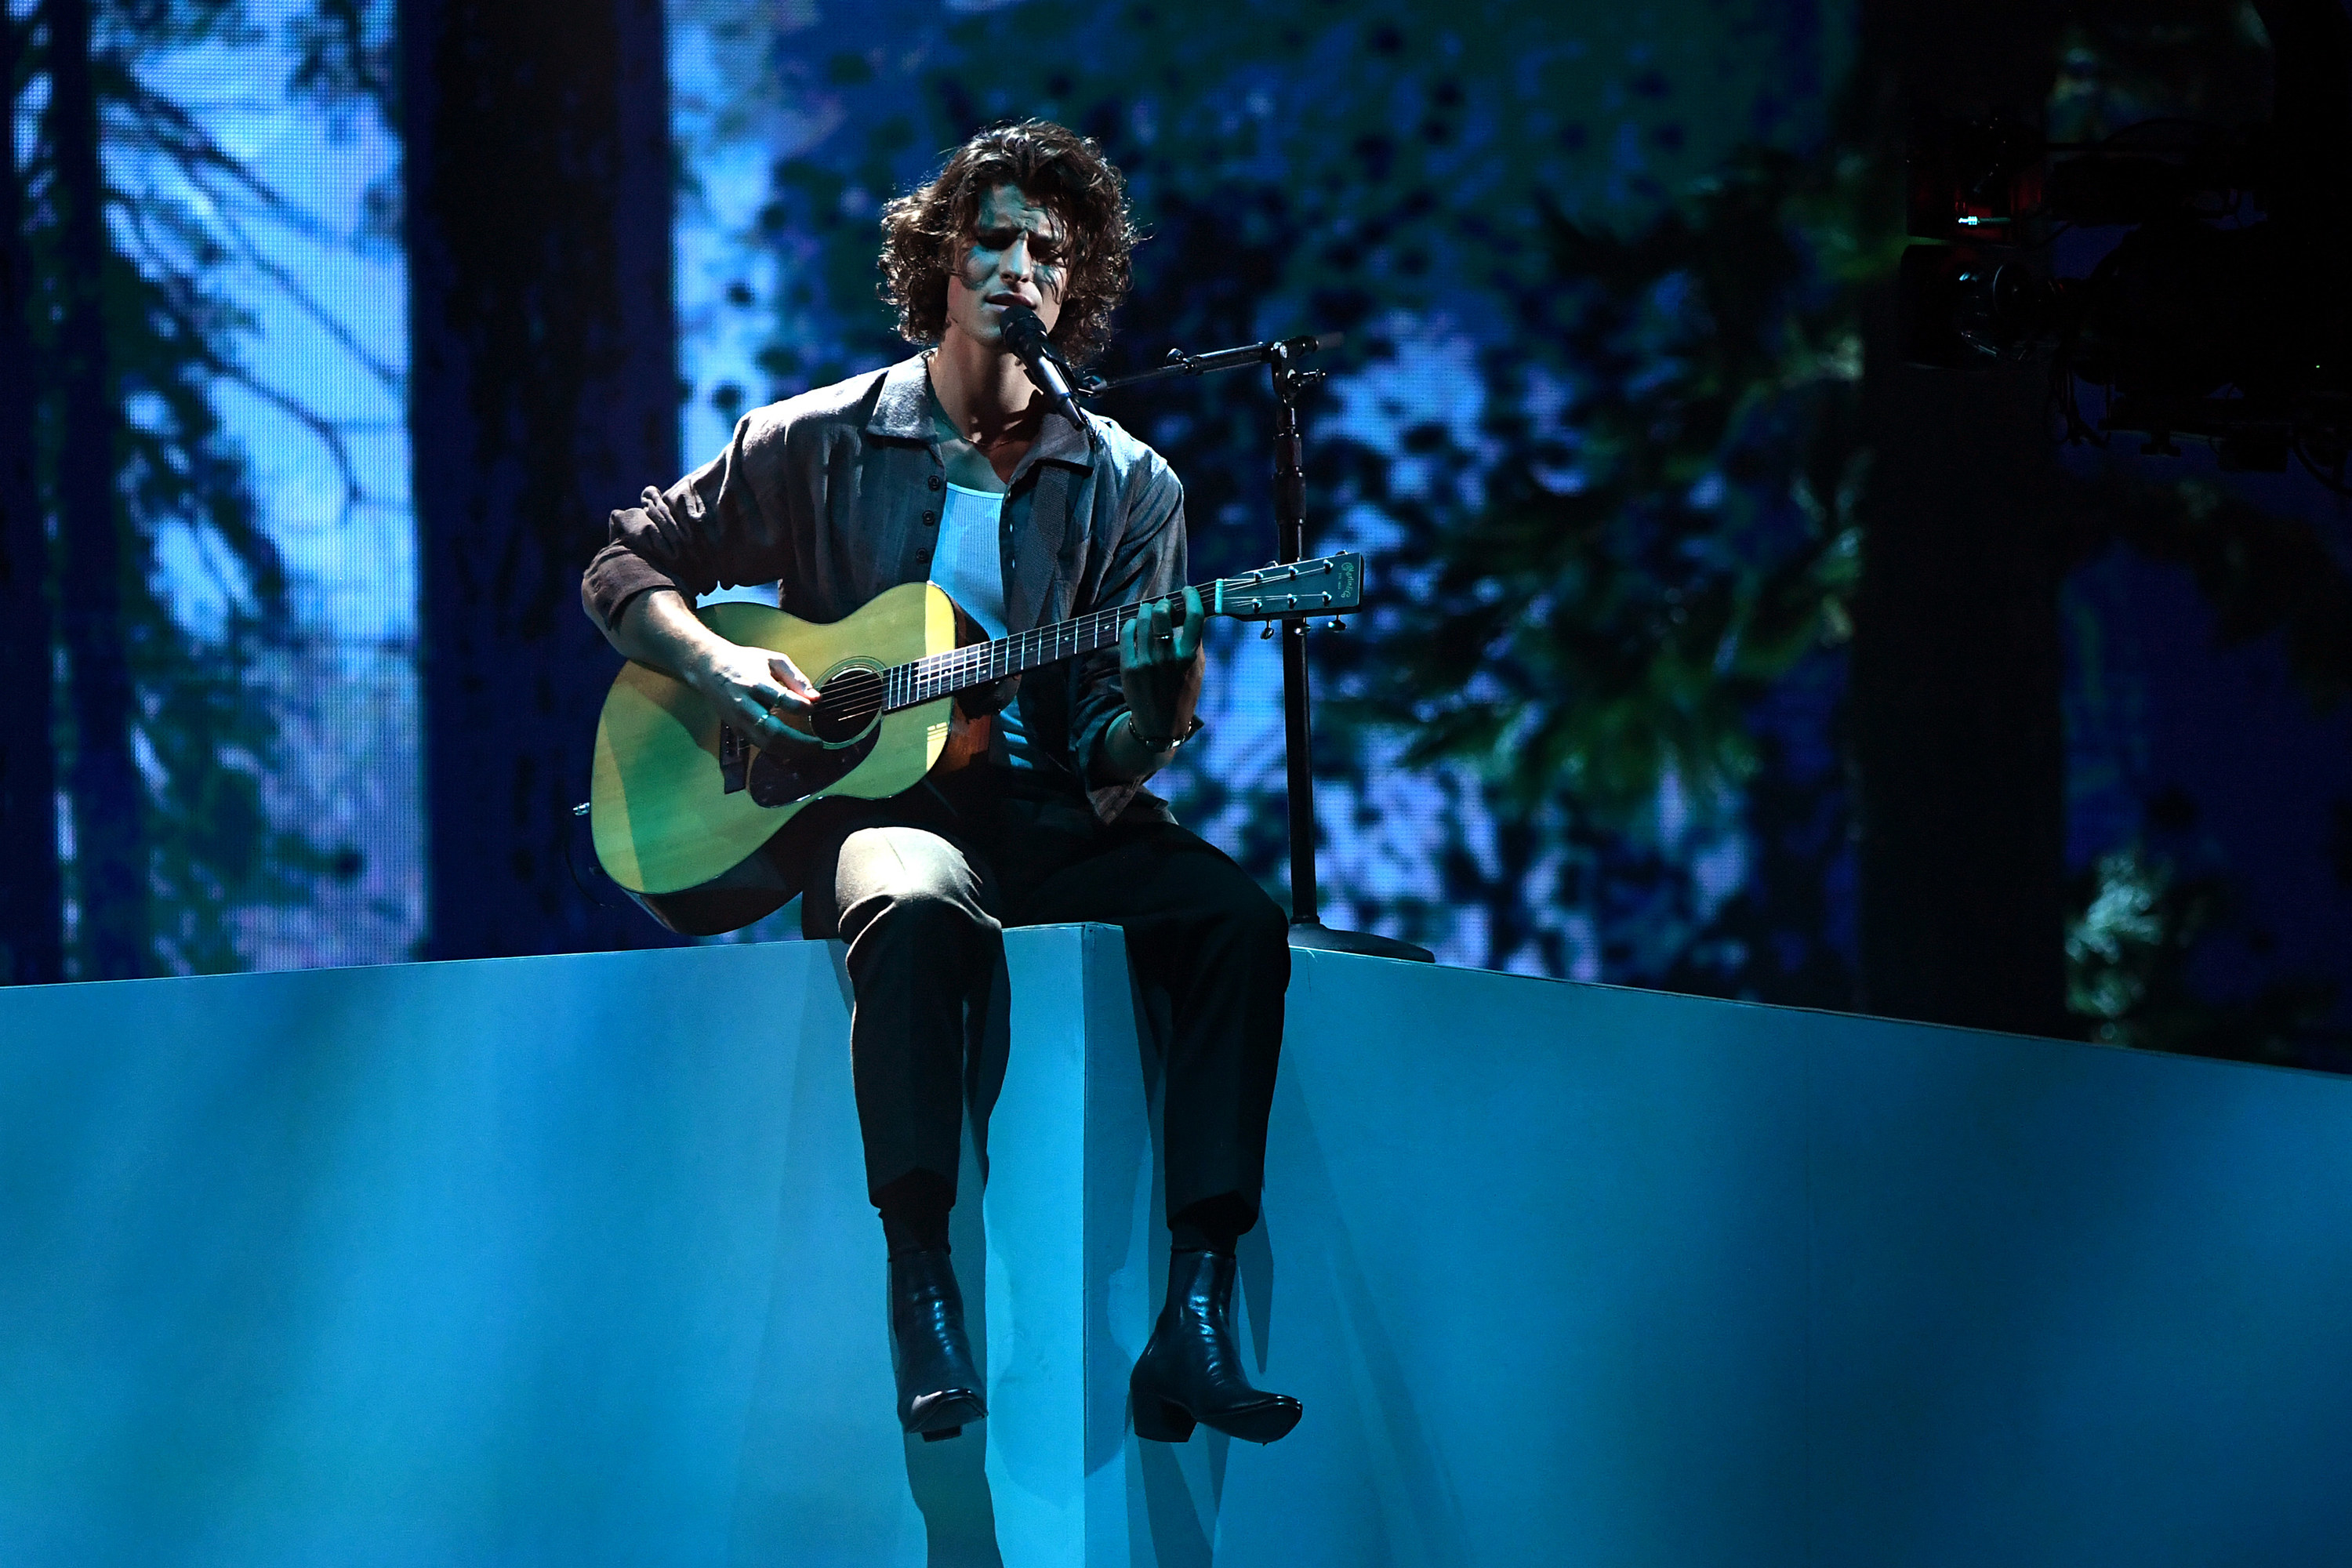 Shawn sits on a ledge on a stage while performing and playing guitar